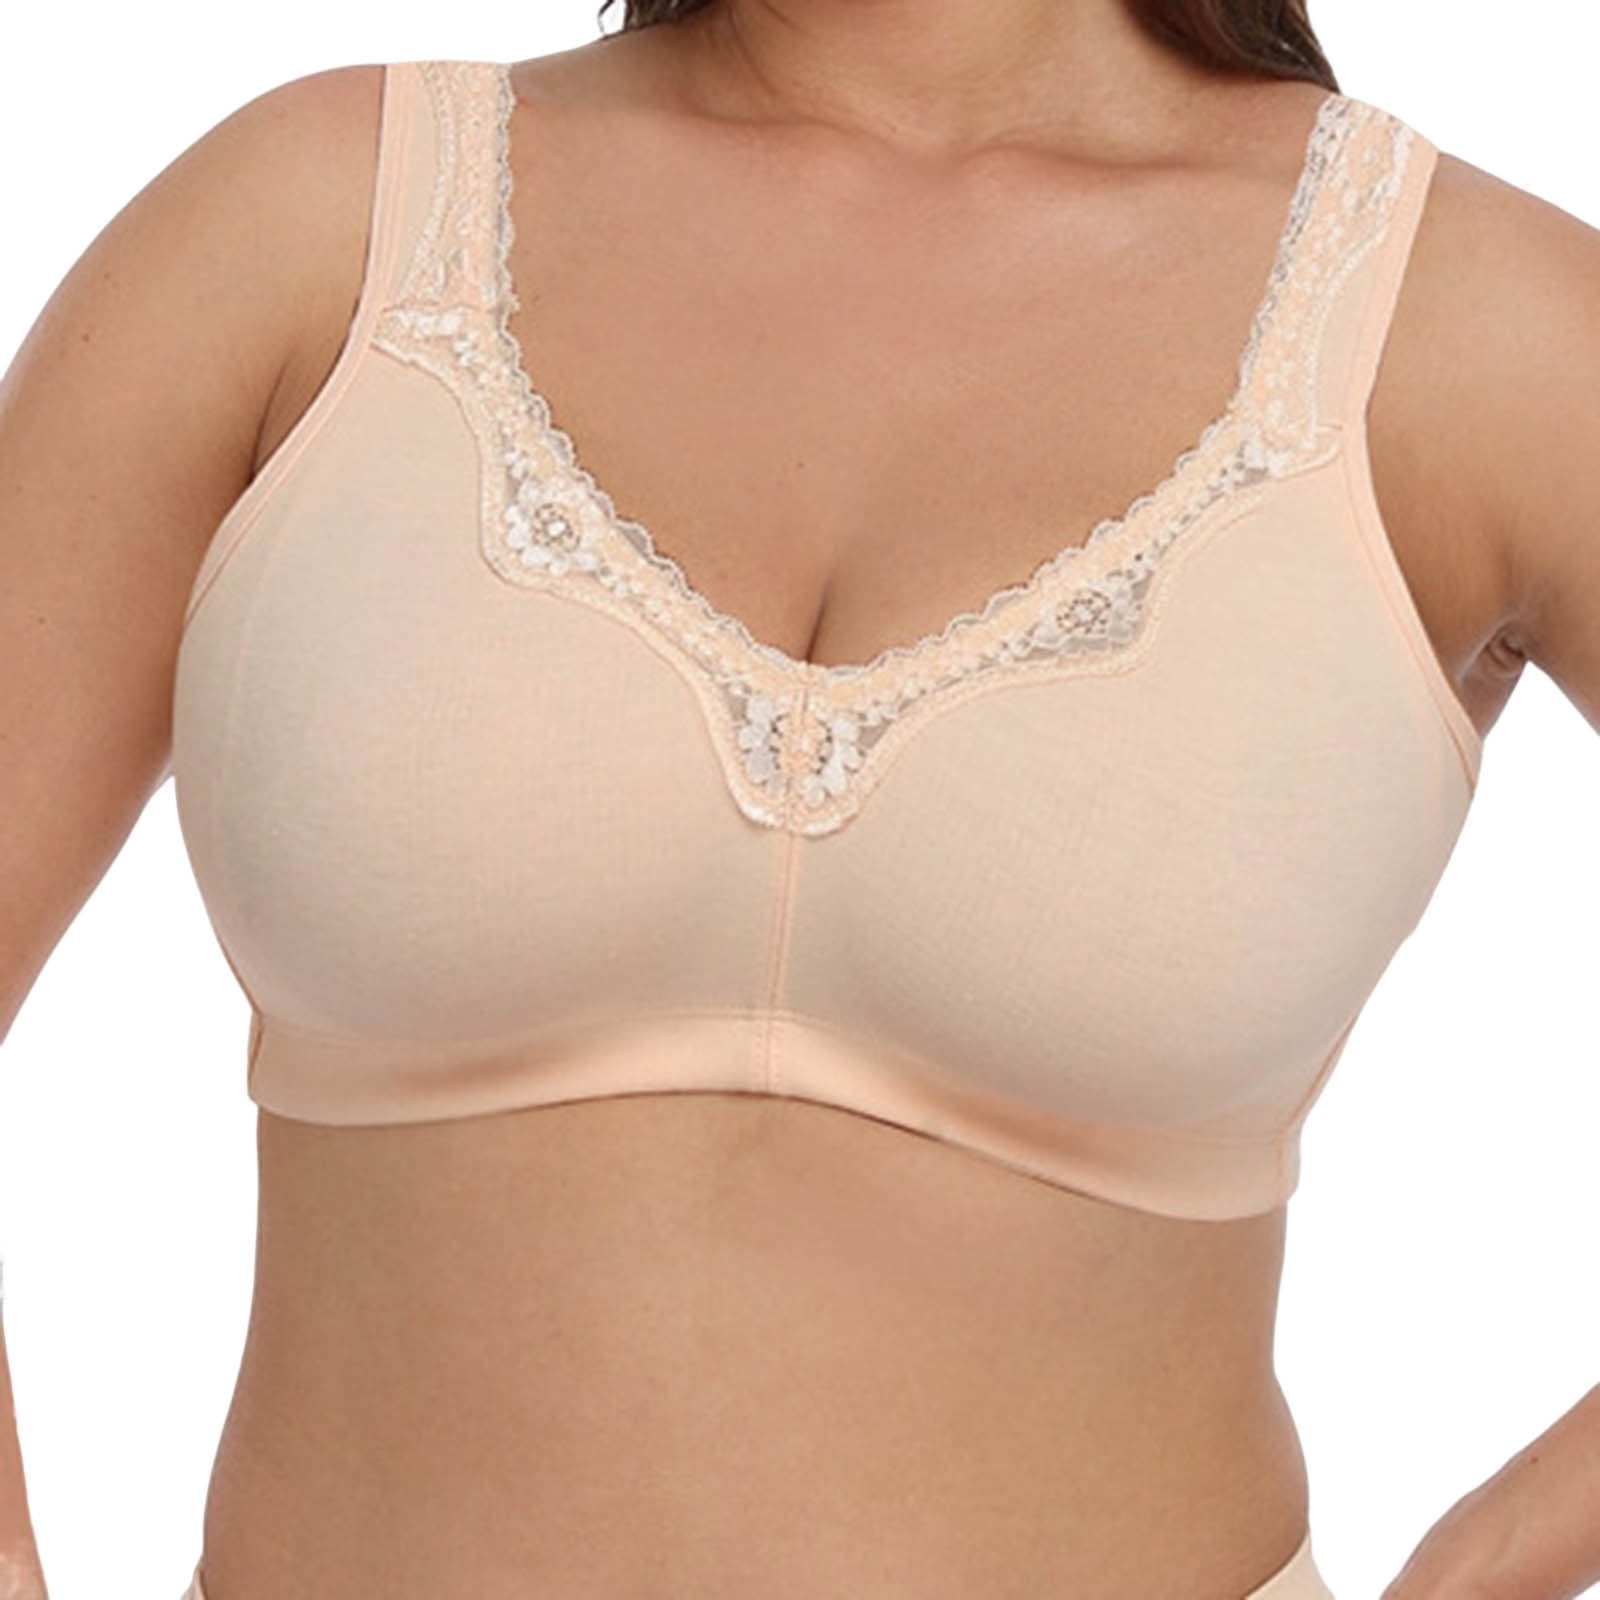 QUYUON Clearance Balconette Bra Women's Large  Breathable,Sweat-absorbing,Collated,Lace,Pure Cotton Comfortable Bra Active  Fit Thin and Lightweight Bra Khaki 110D 